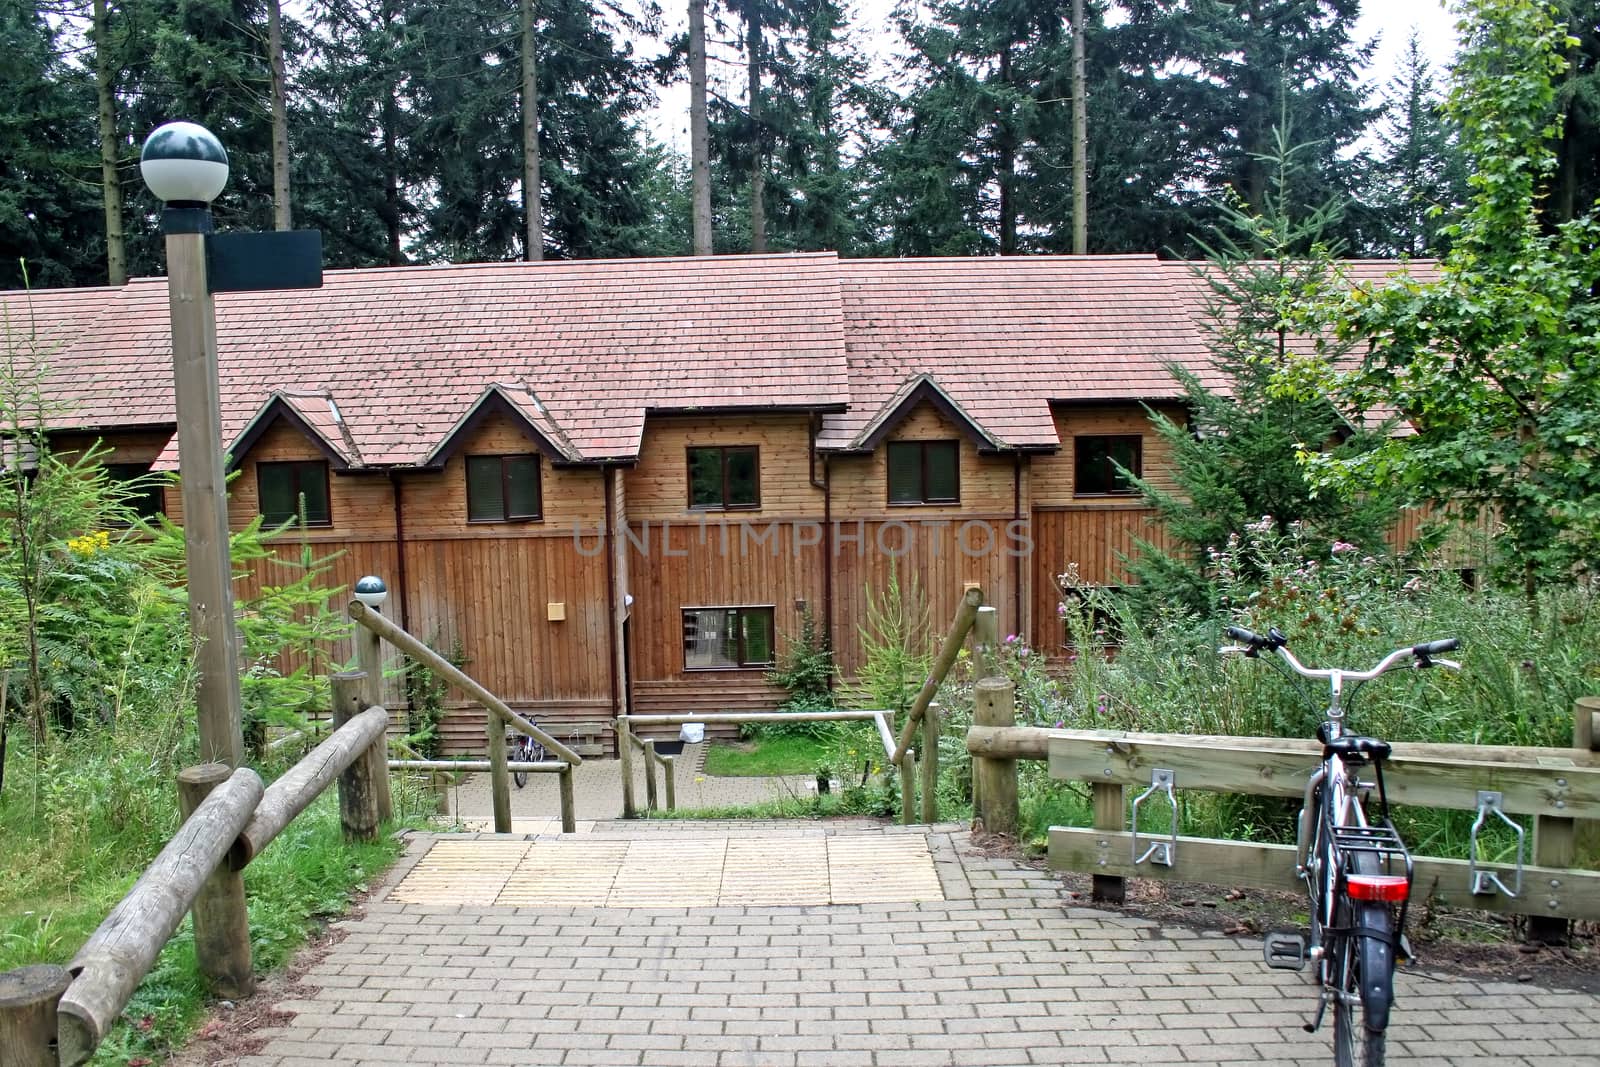 Houses made of wood in a forest